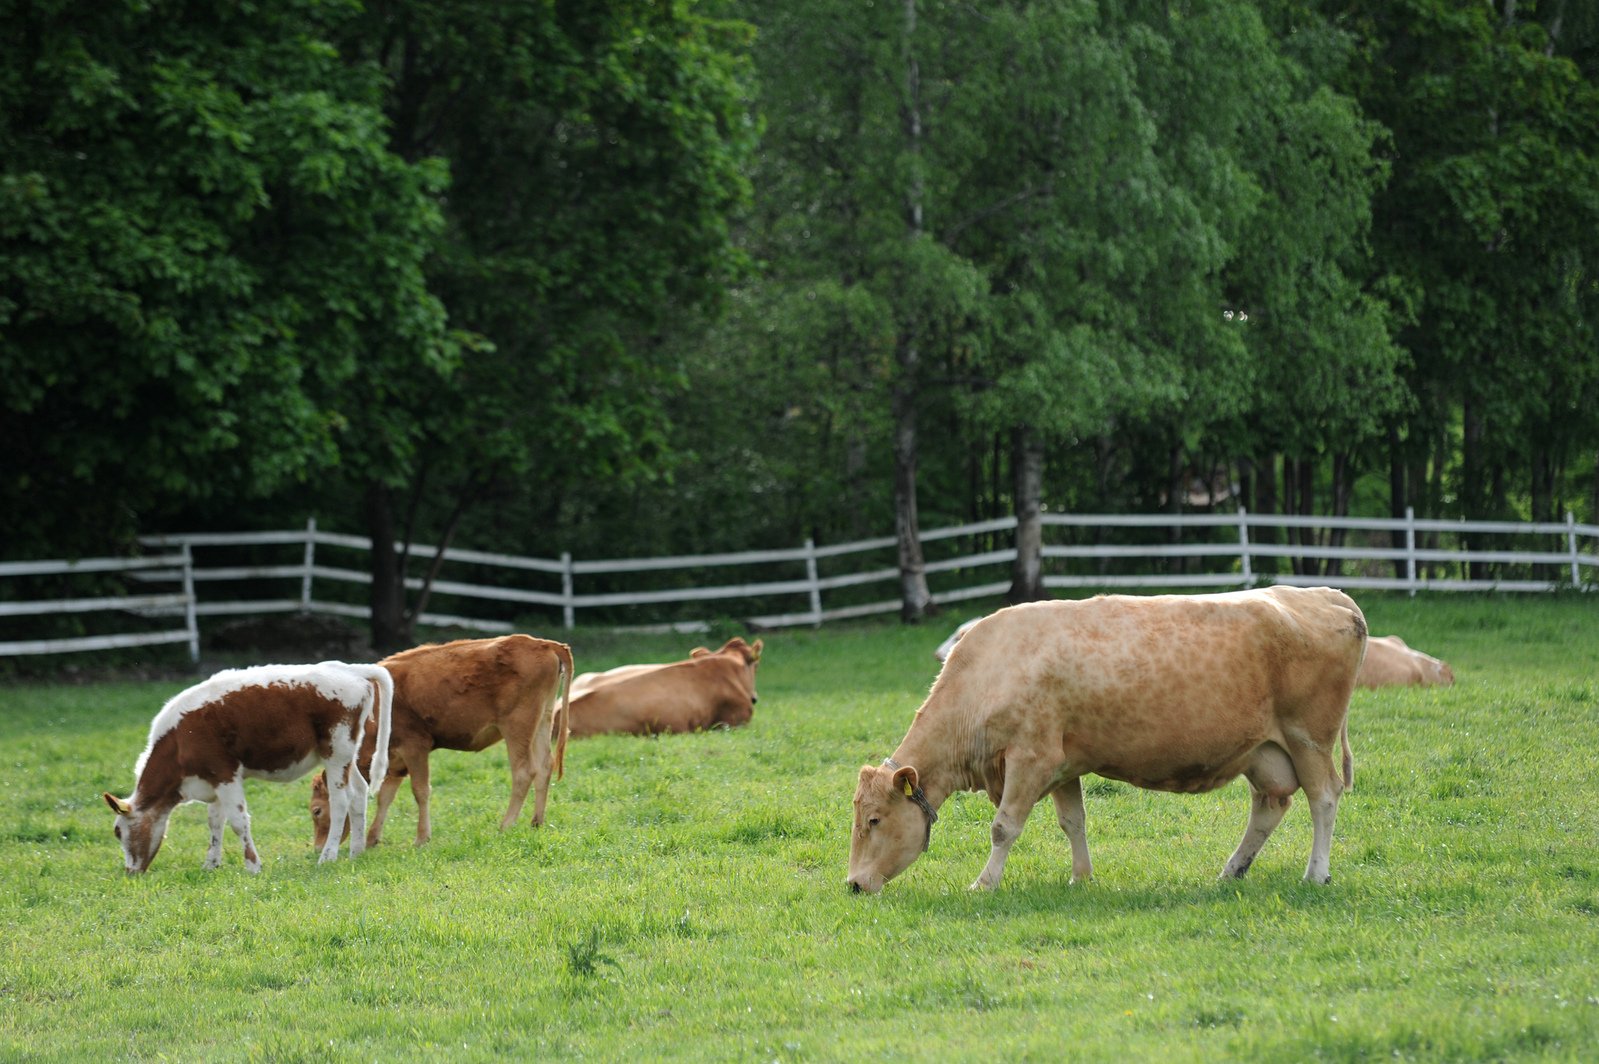 three cows standing and grazing on grass with fence and trees in background